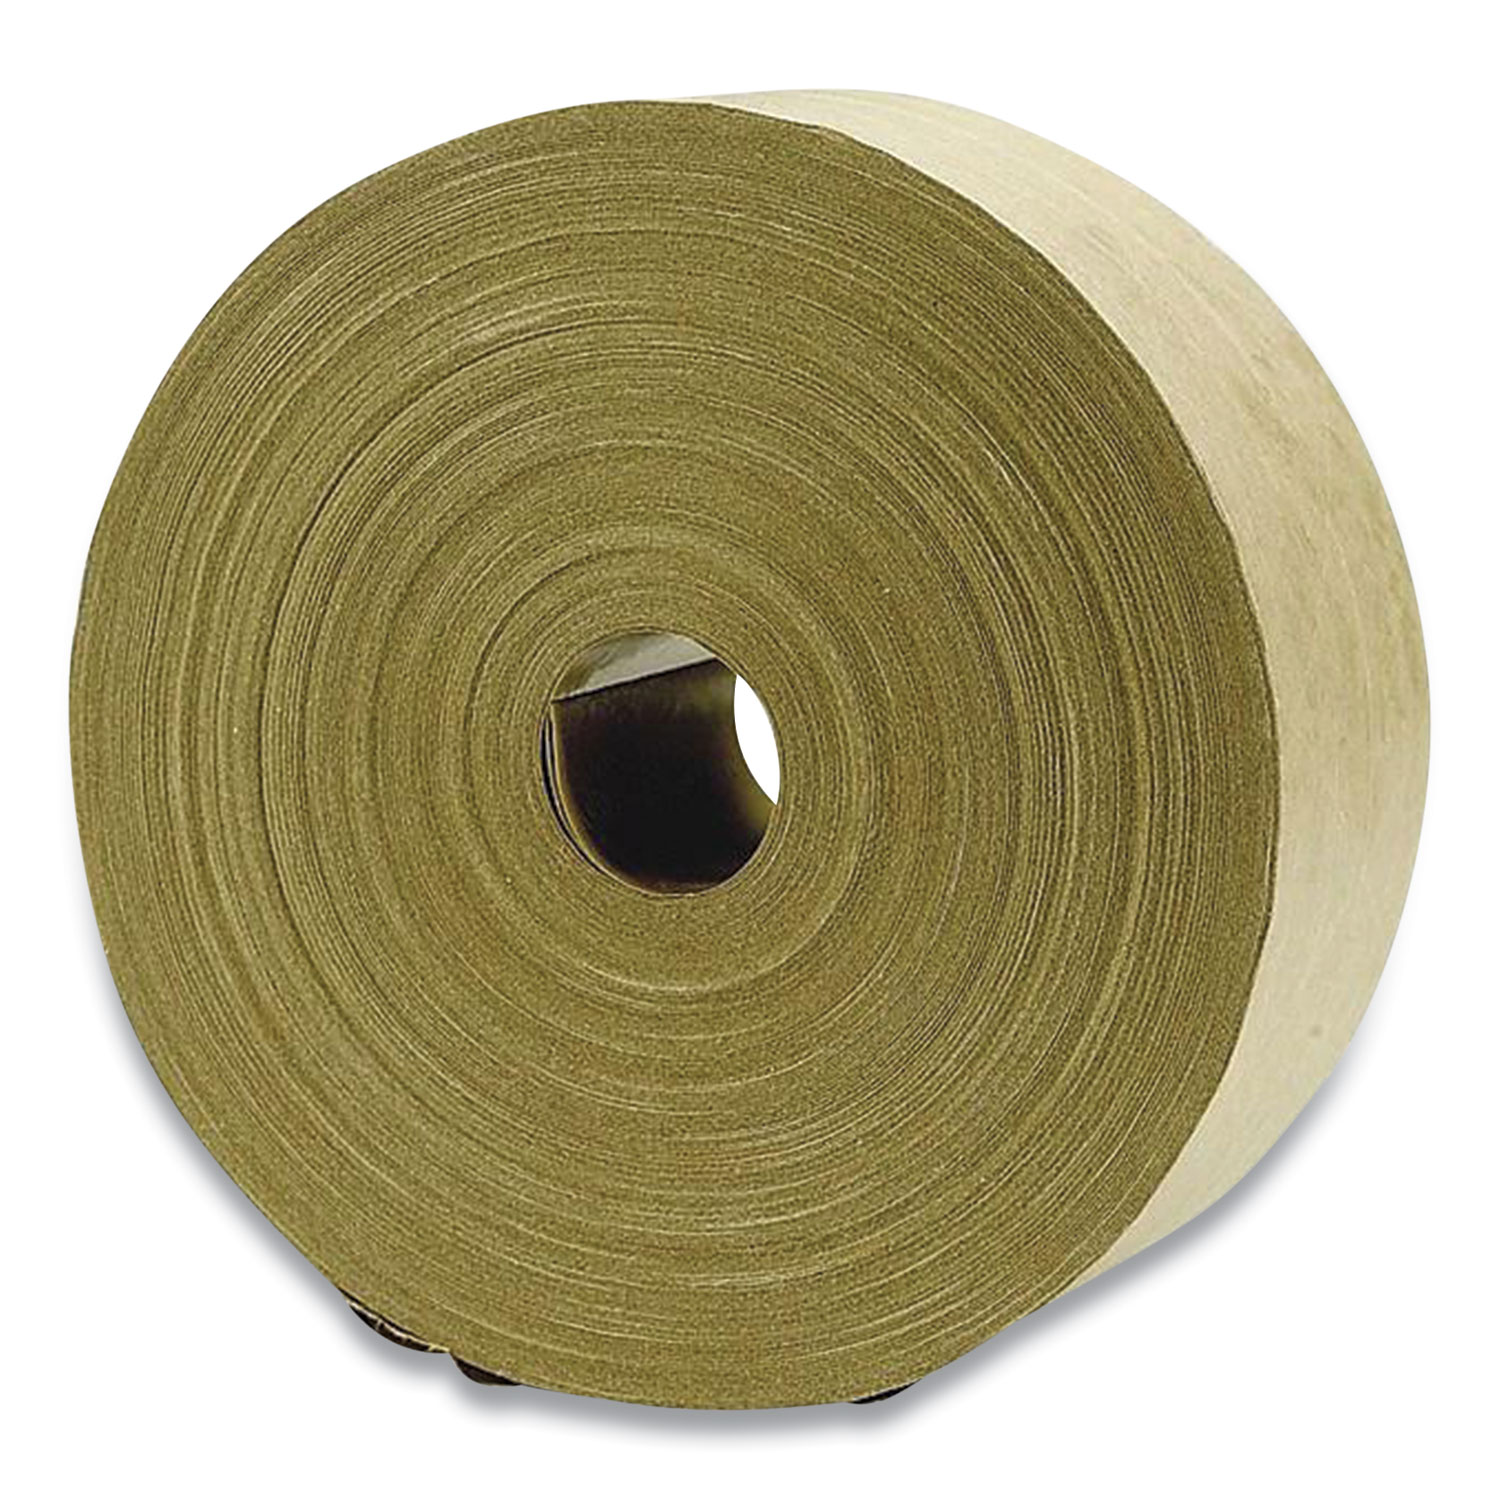  Duck 630639 Reinforced Packing Tape, 1.5 Core, 2.75 x 166.6 yds, Brown (DUC523886) 